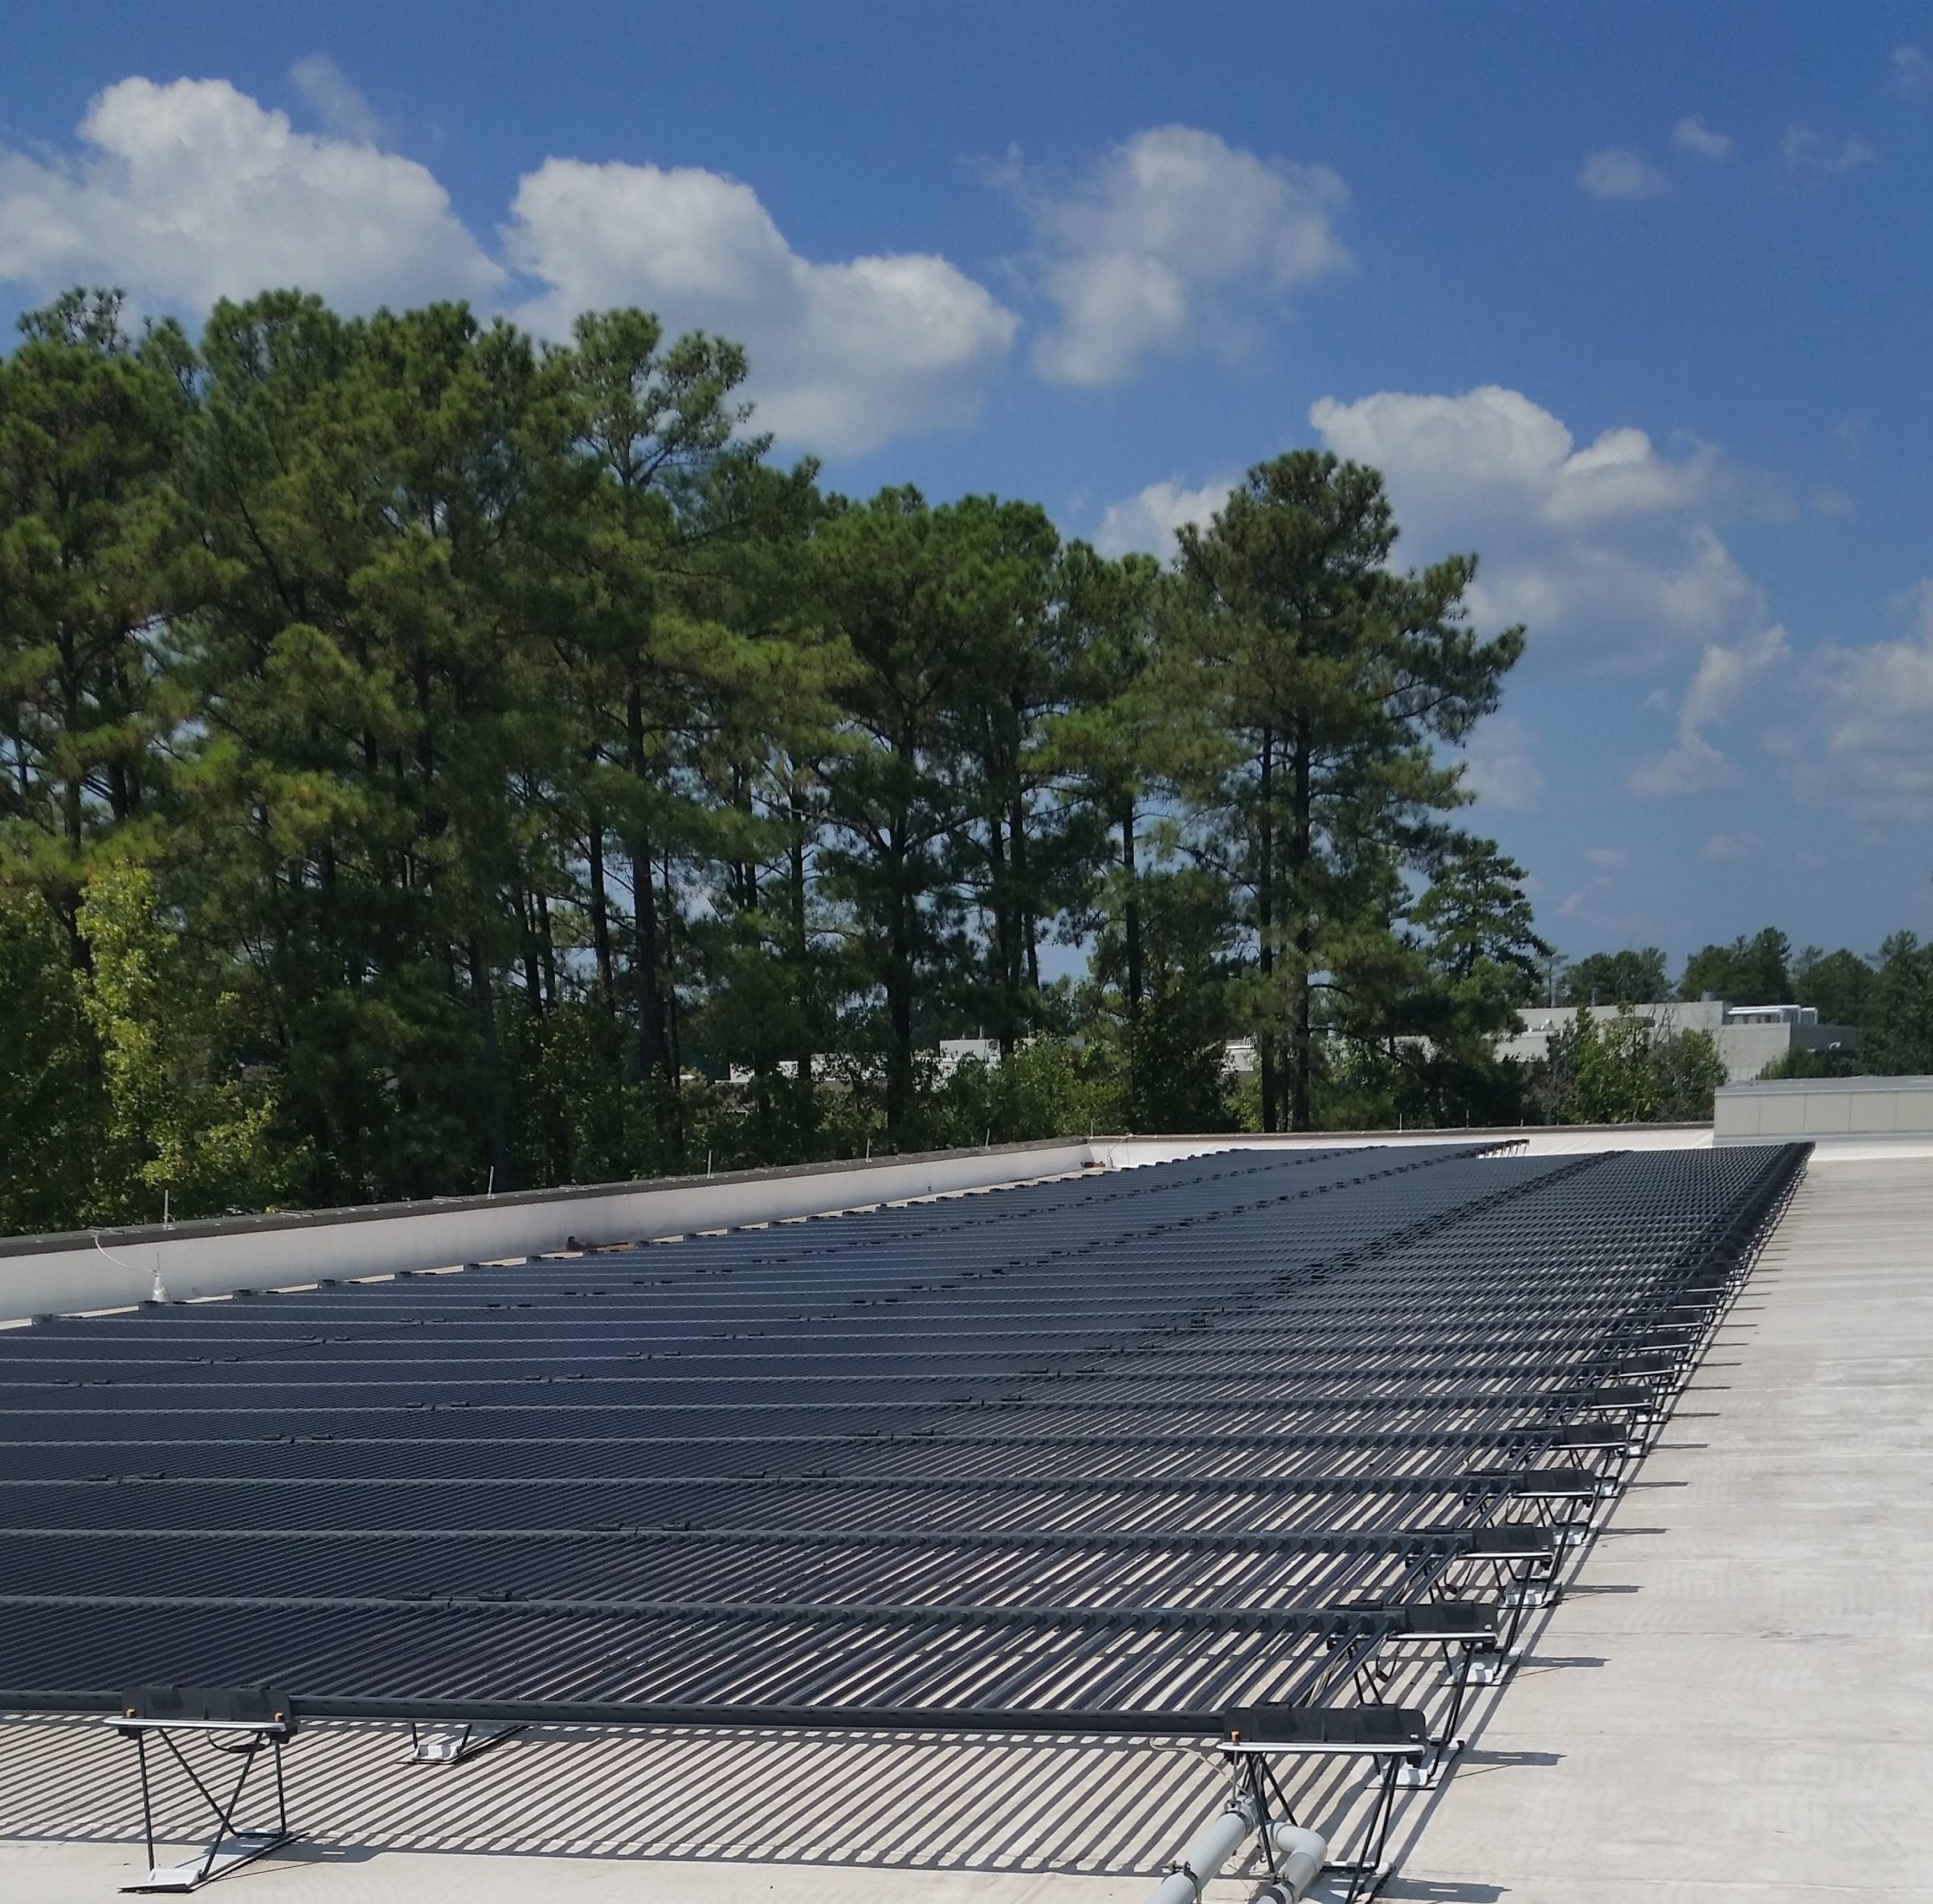 Cisco maintains a rooftop solar PV system at the RTP campus